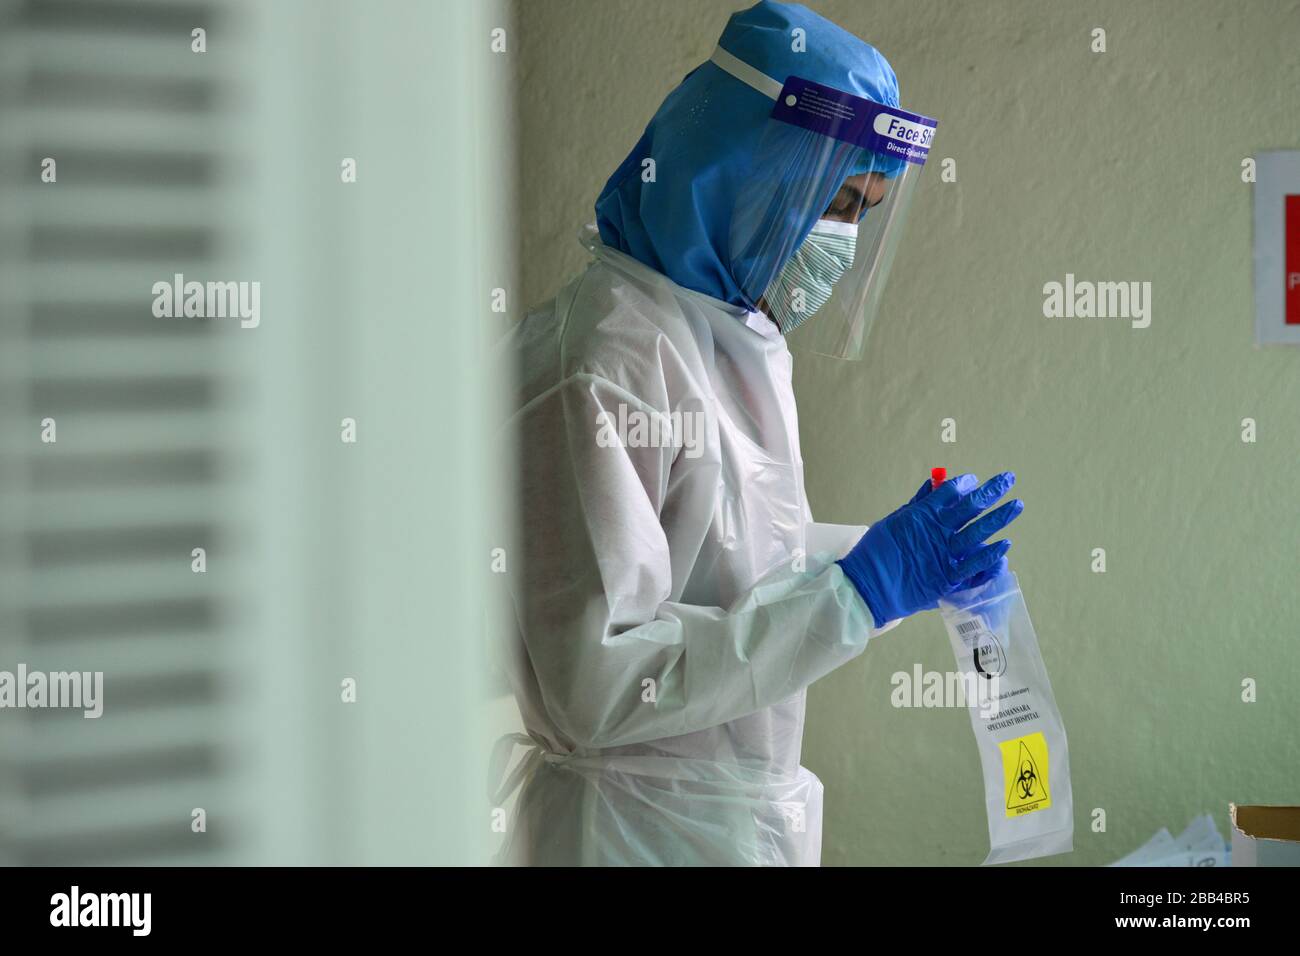 Kuala Lumpur, Malaysia. 30th Mar, 2020. A medical staff member works at a COVID-19 testing area of a hospital in Damansara near Kuala Lumpur, Malaysia, March 30, 2020. A total of 37 people have died of the COVID-19 in Malaysia as of Monday with 156 newly confirmed cases, bringing the total to 2,626, said the Health Ministry. Credit: Chong Voon Chung/Xinhua/Alamy Live News Stock Photo